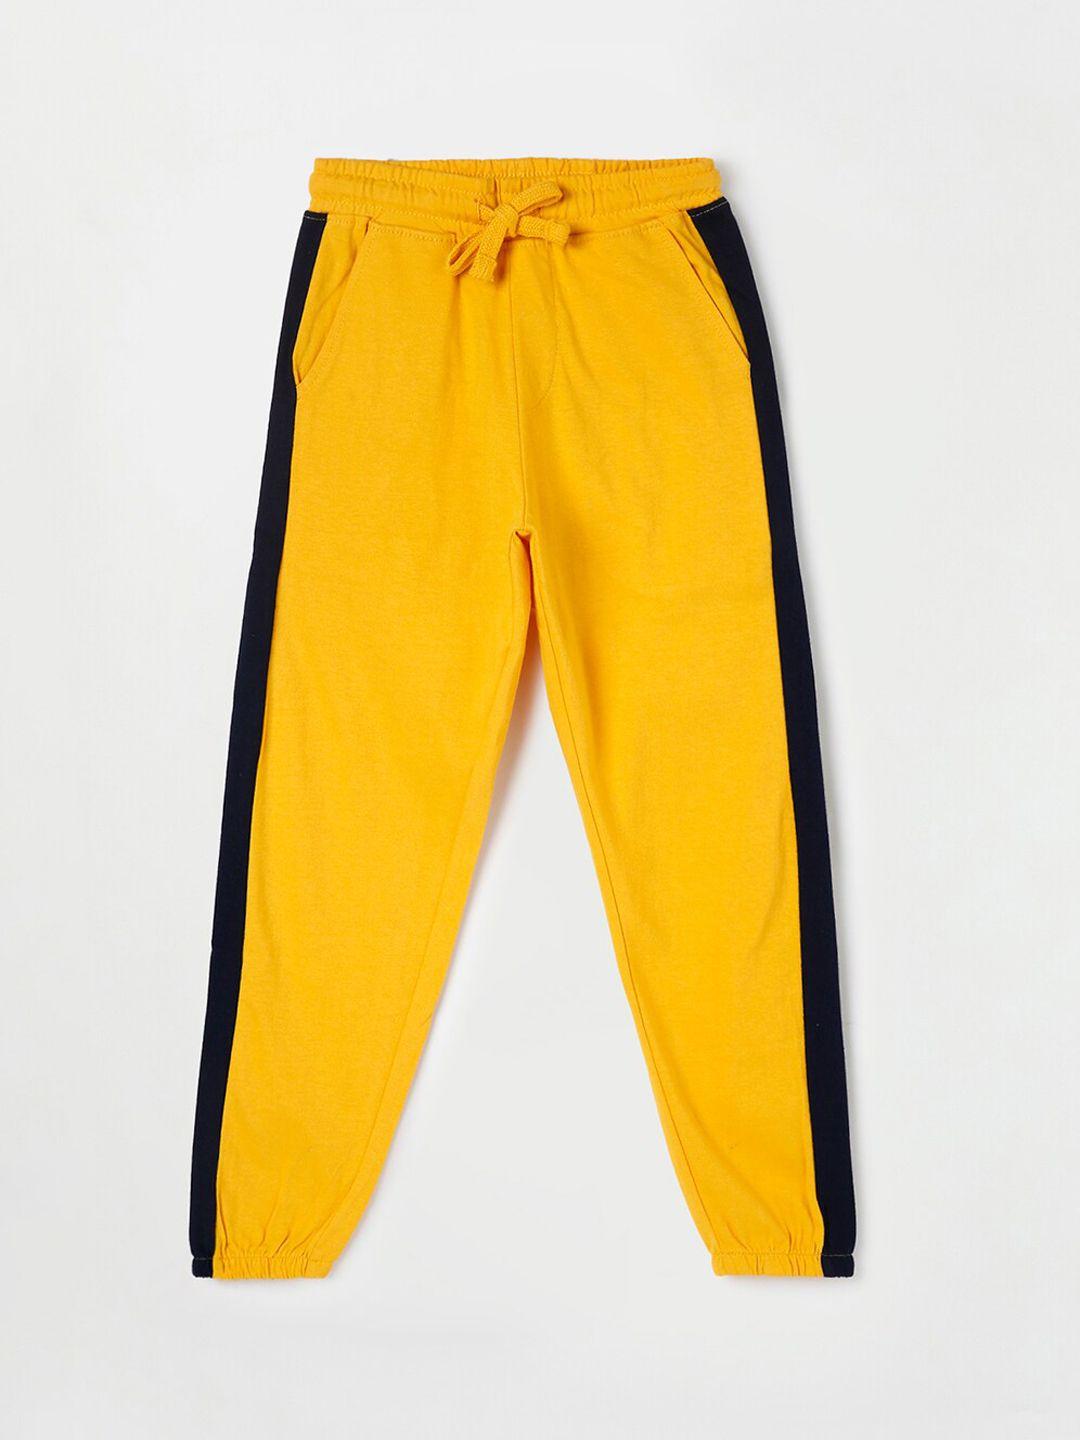 fame-forever-by-lifestyle-boys-yellow-&-black-solid-cotton-jogger